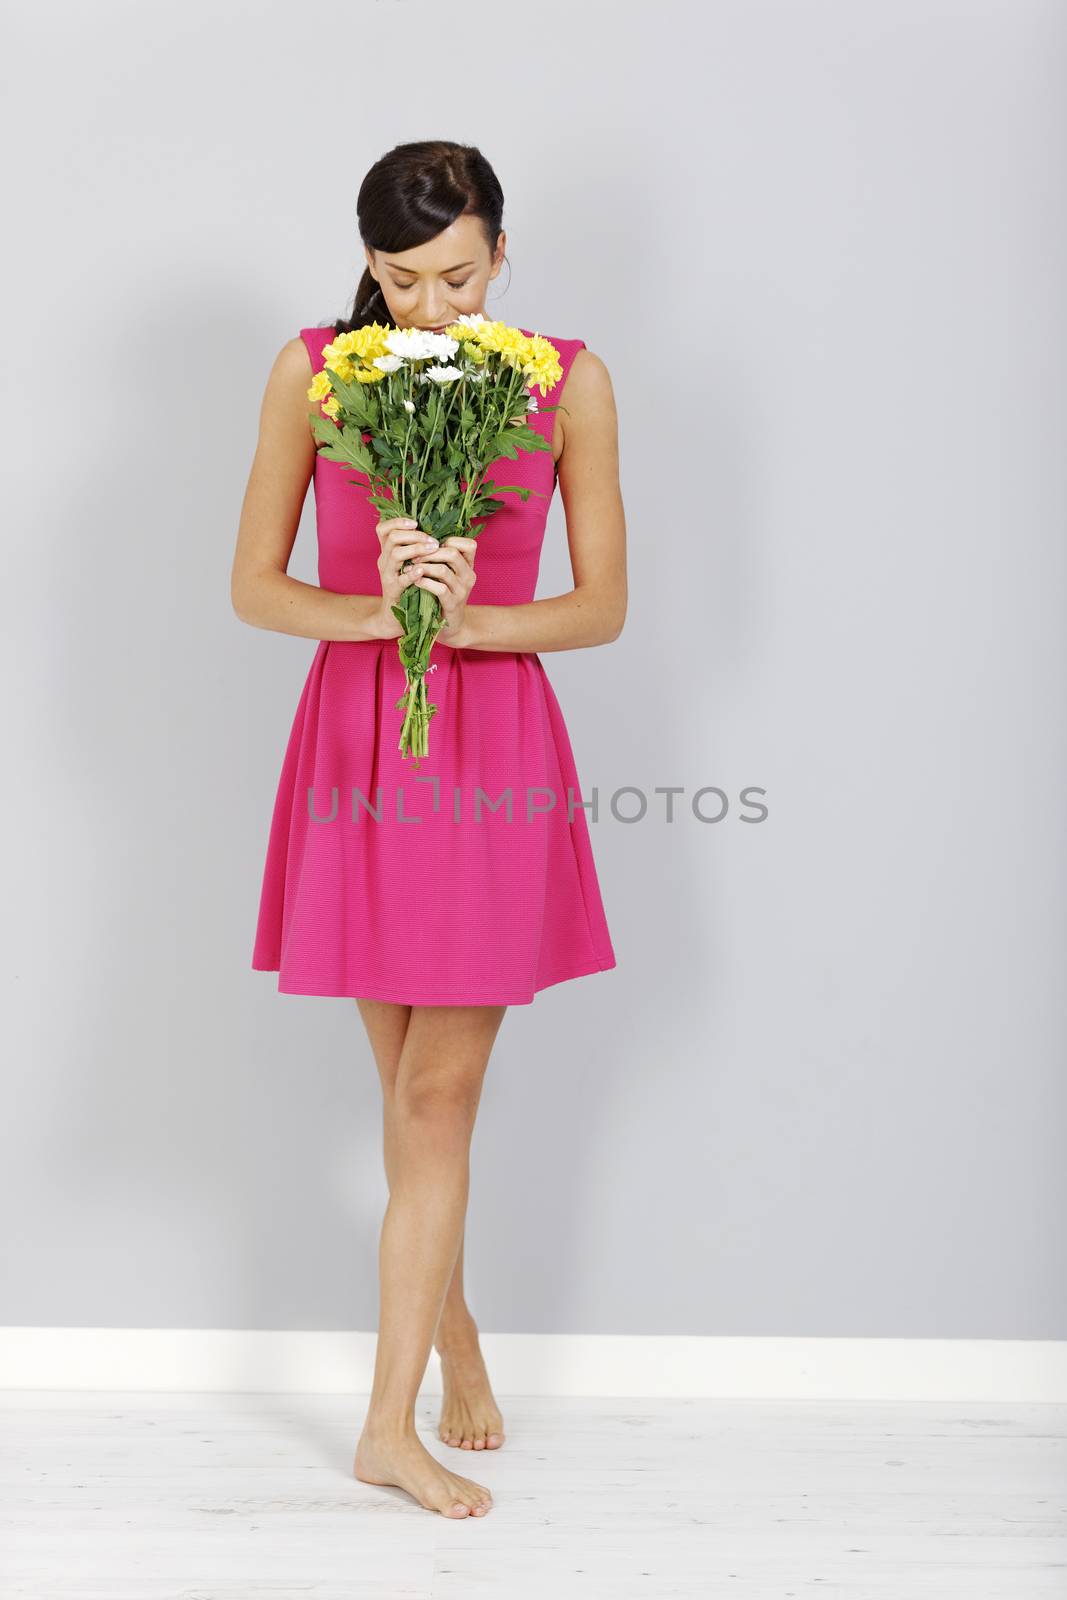 Young woman holding a bouquet of fresh flowers